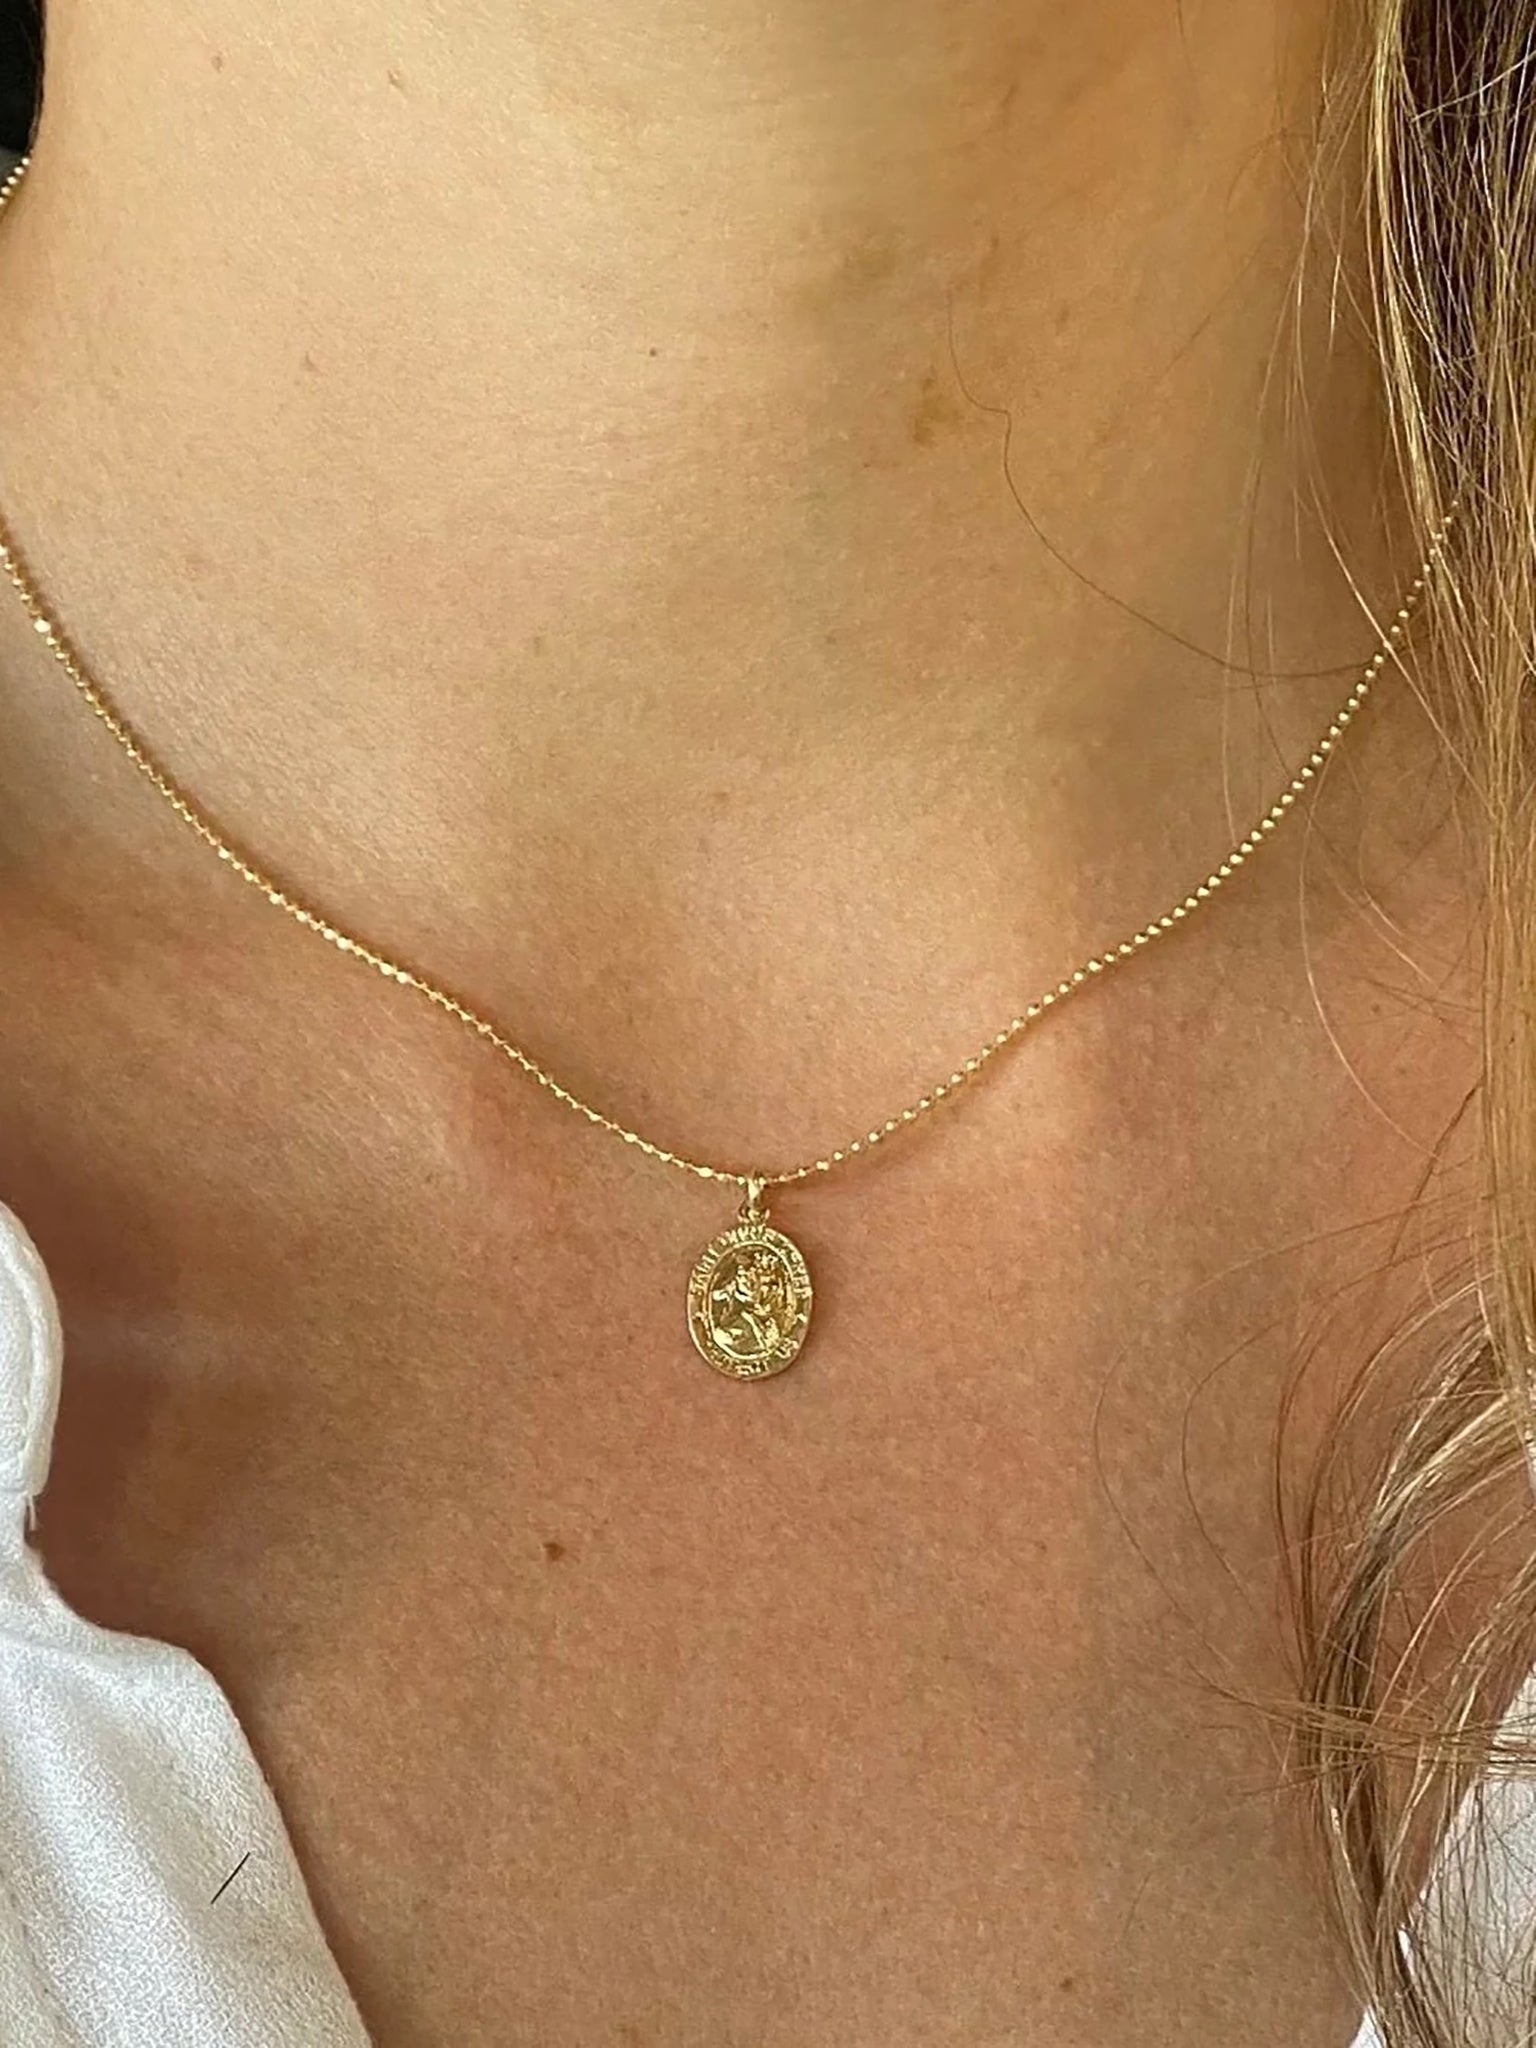 L & T Heirlooms Second Hand 9ct Gold St Christopher Pendant Necklace, Dated  Circa 1992 at John Lewis & Partners